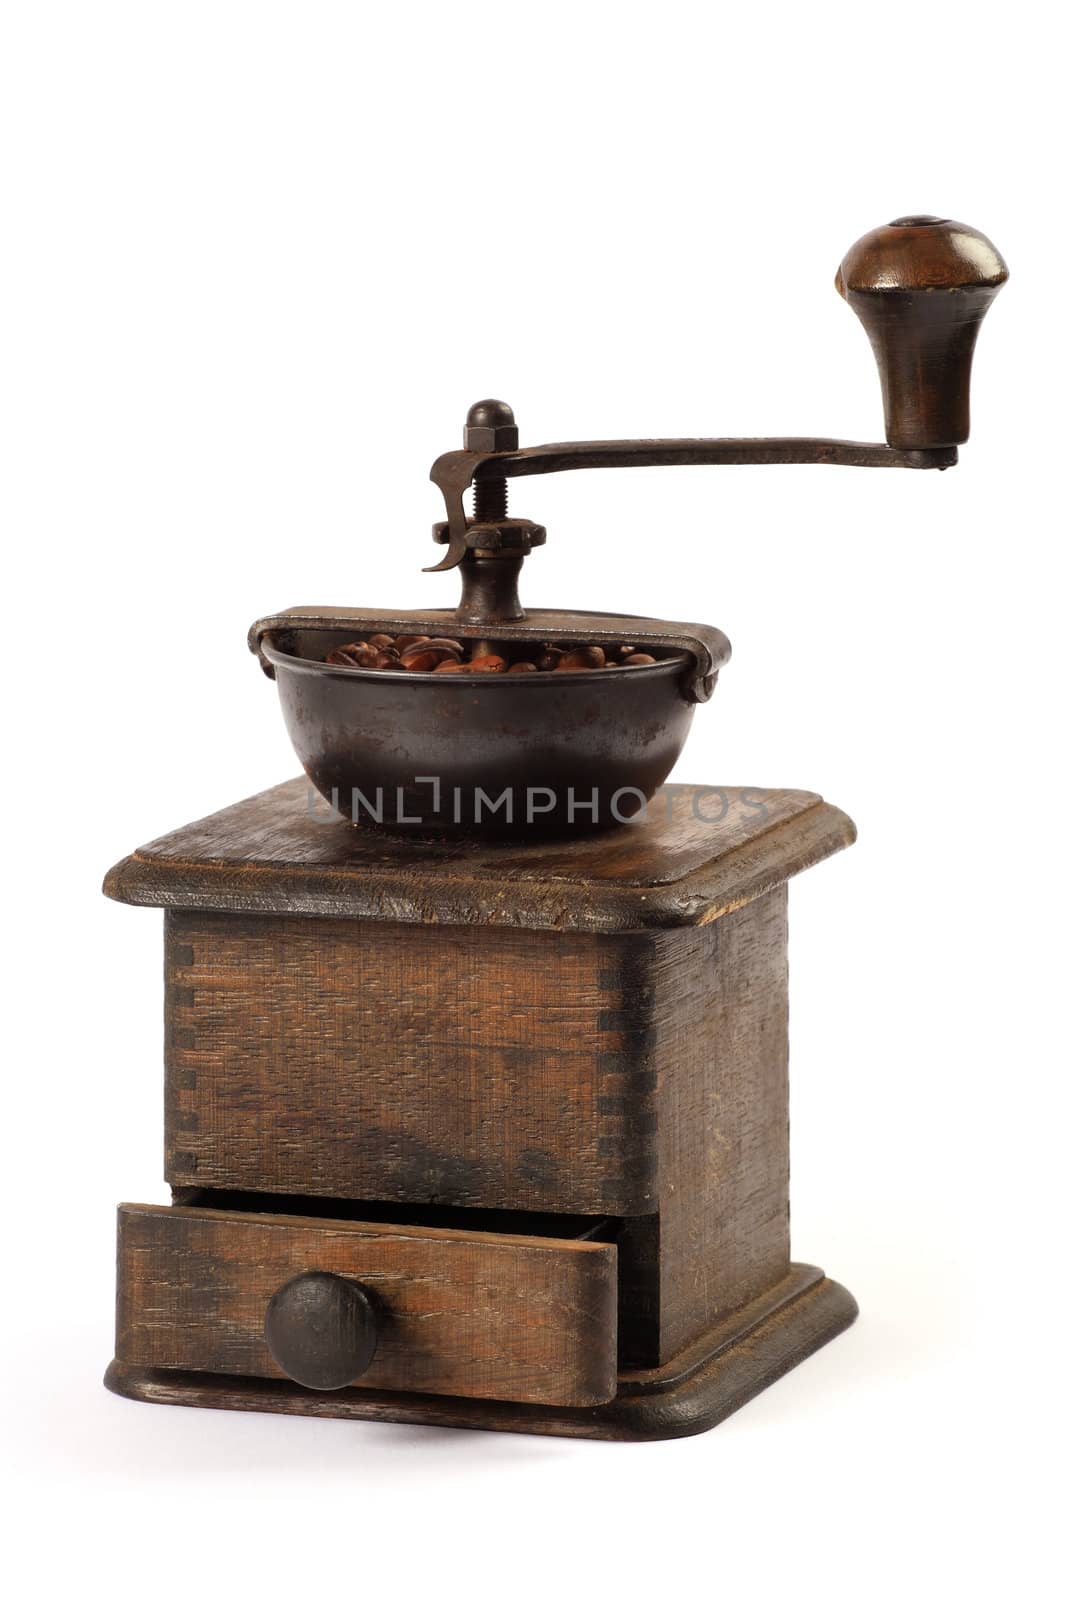 Photo of an antique coffee grinder isolated on a white background.